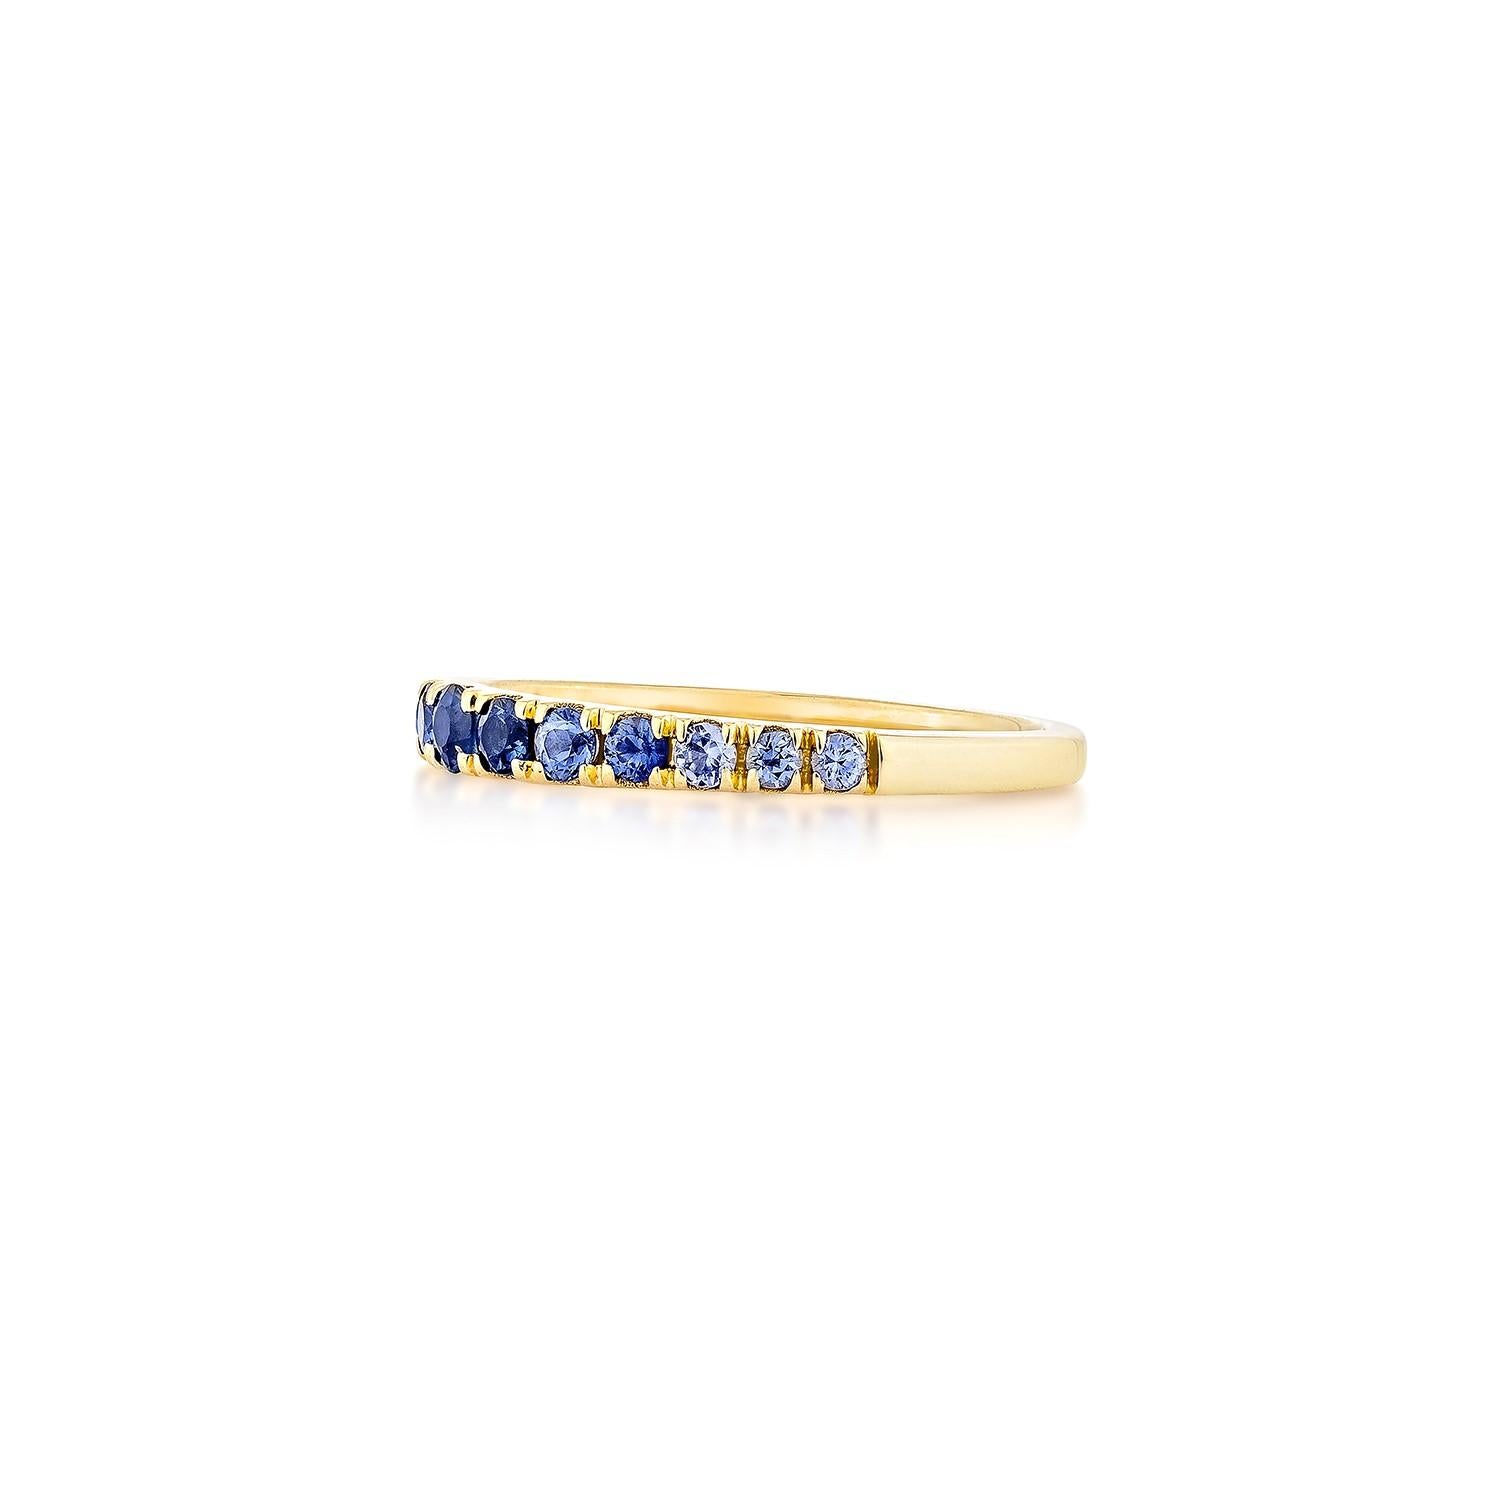 Round Cut 0.64 Carat Blue Sapphire Stackable Ring in 14Karat Yellow Gold.   For Sale